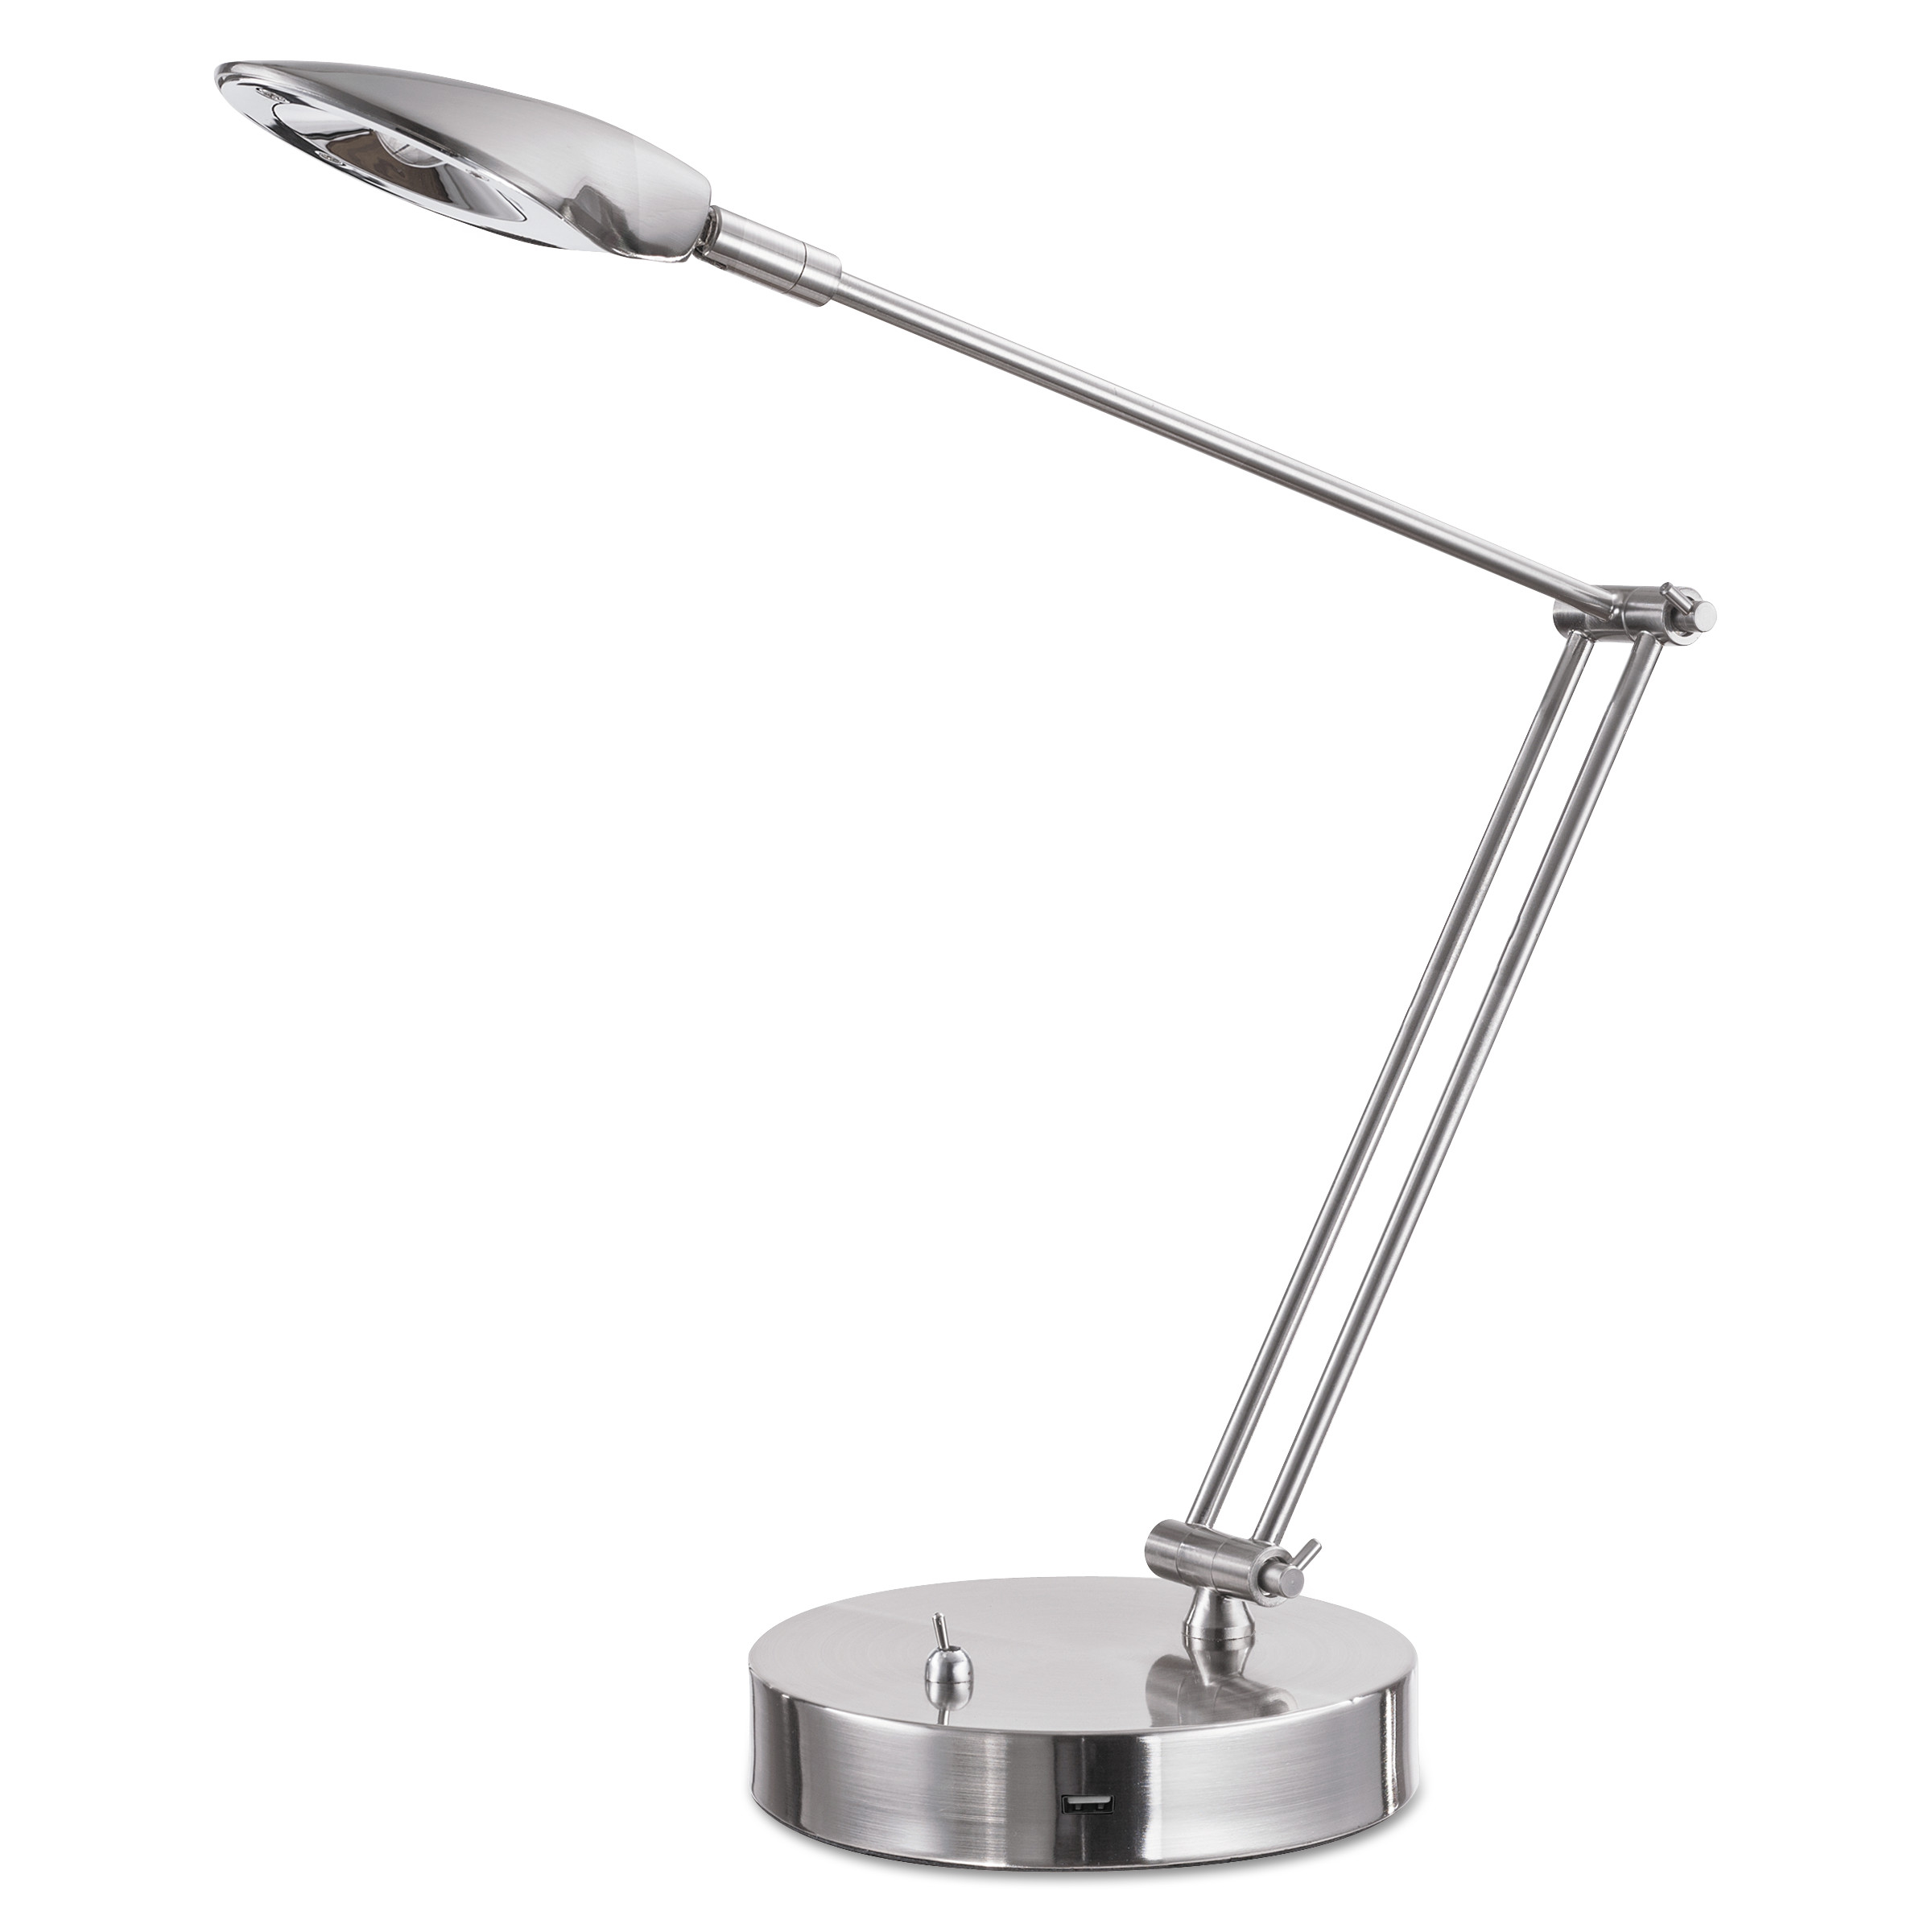 Adjustable LED Task Lamp with USB Port, 11"w x 6.25"d x 26"h, Brushed Nickel